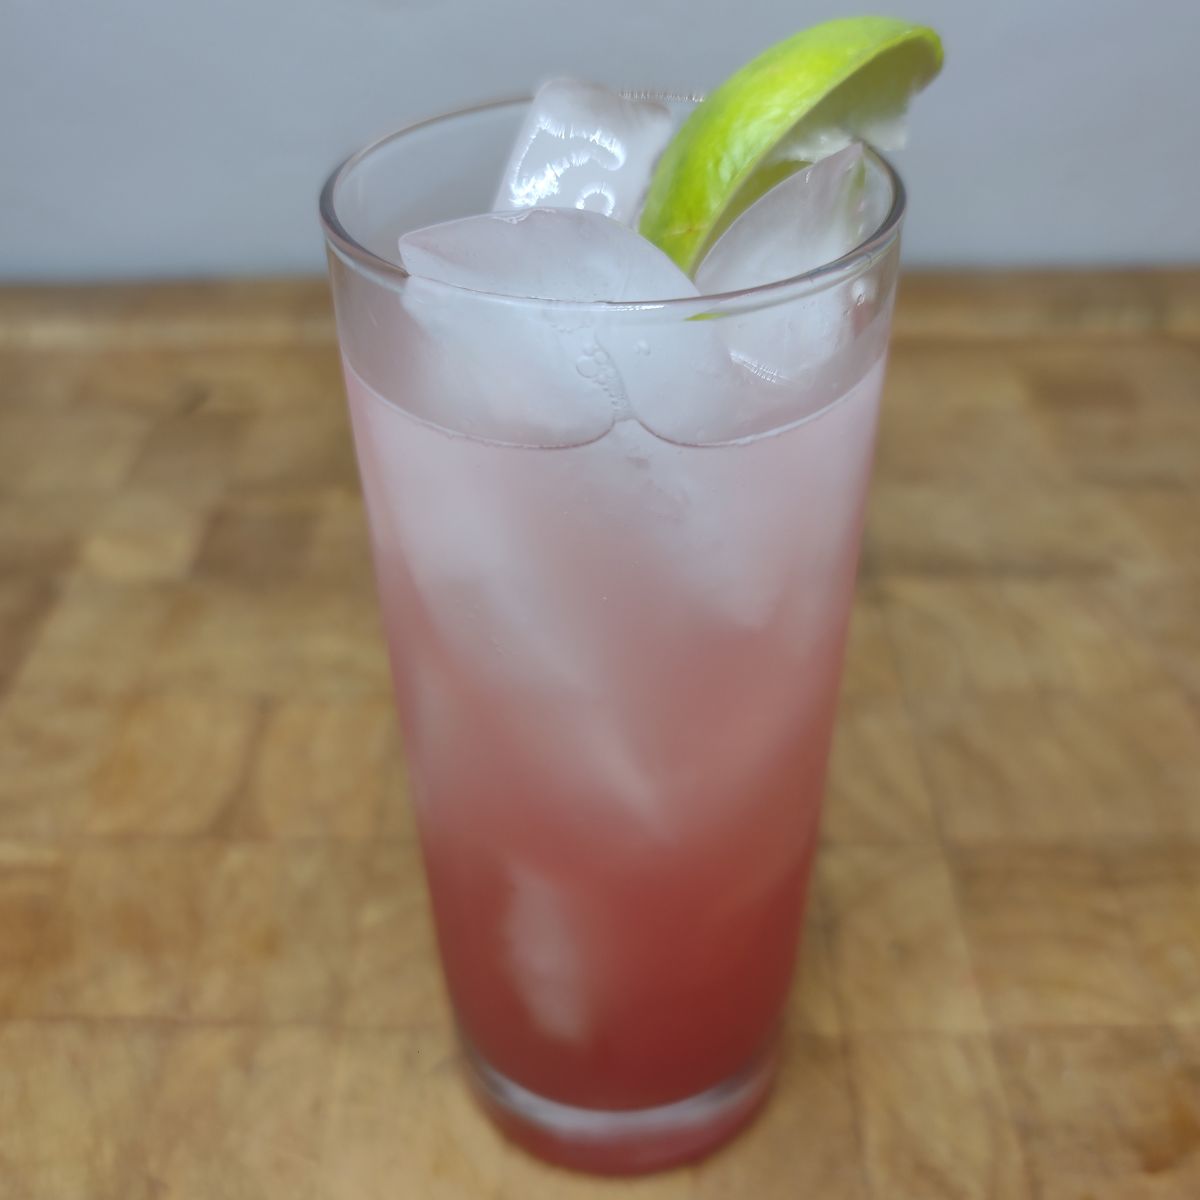 Raspberry Lime rickey with a lime wedge in the glass on a wooden table.